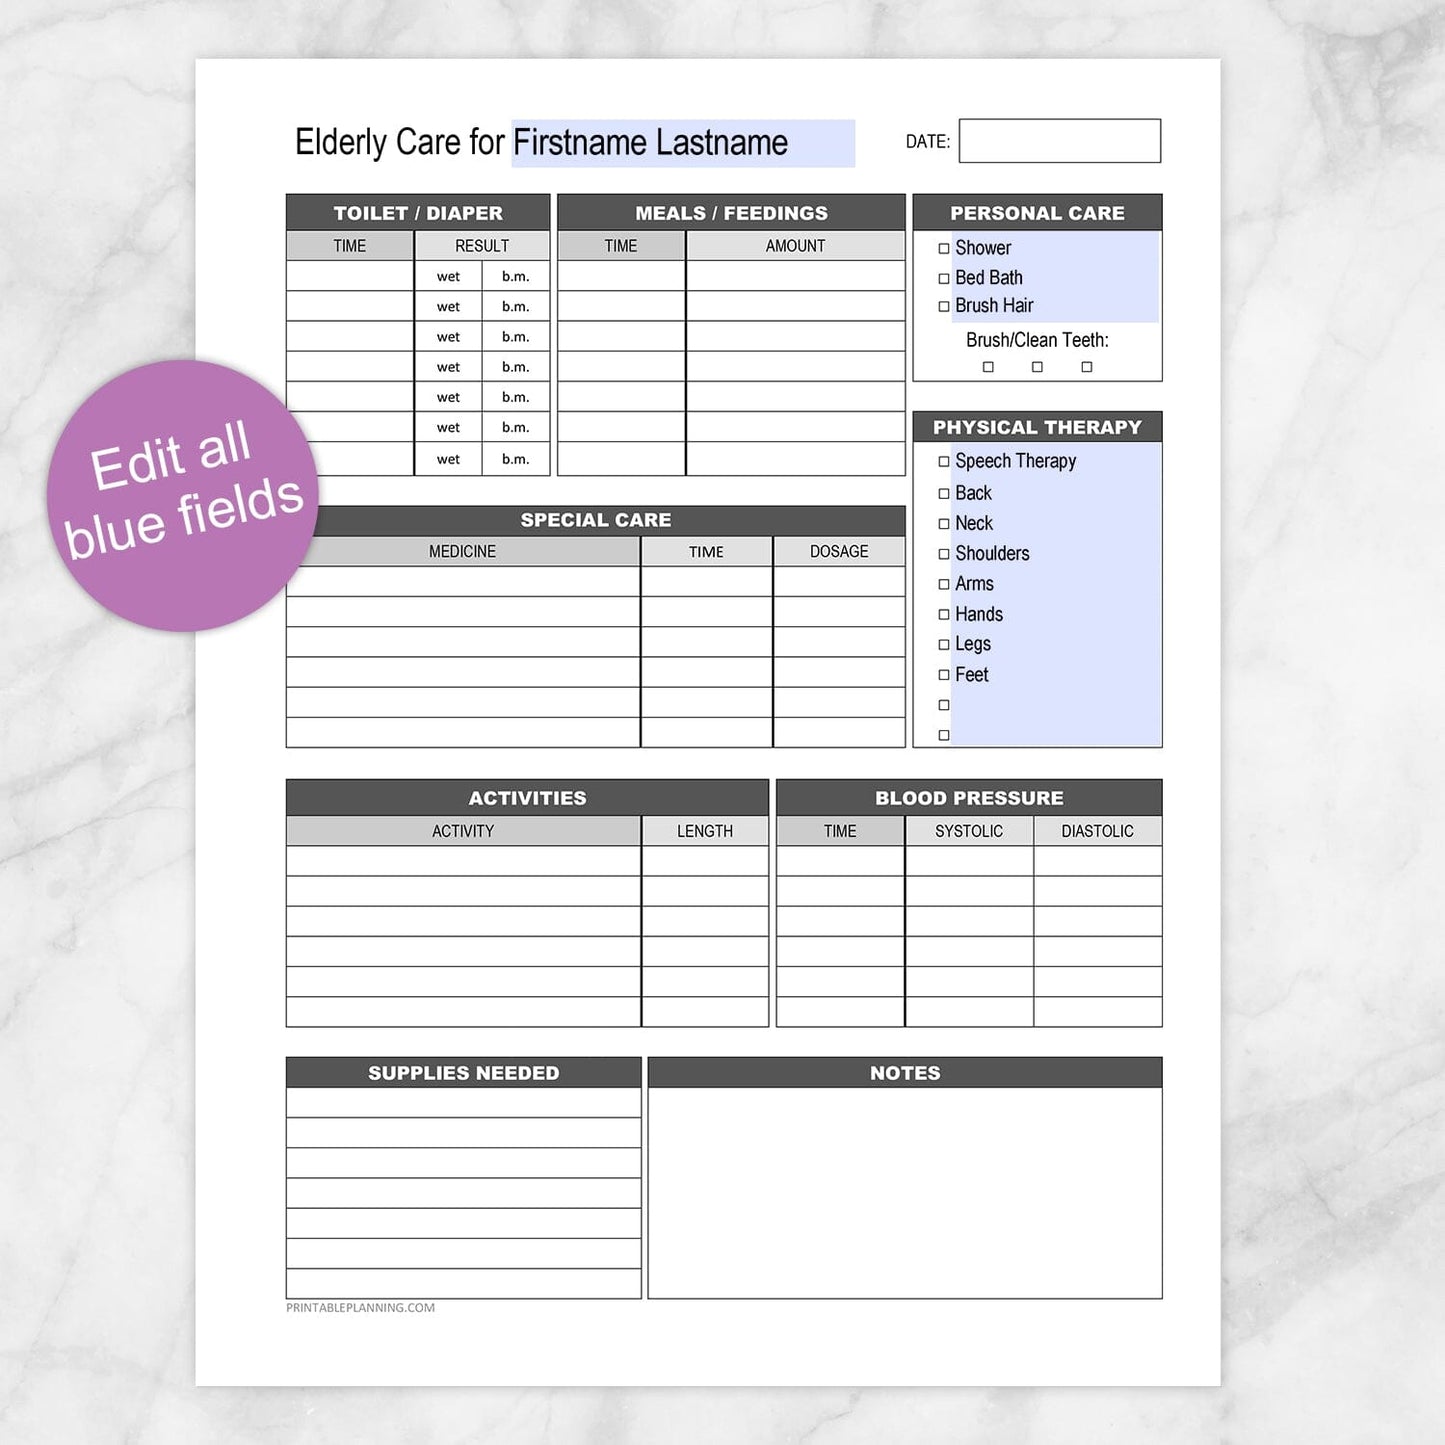 Printable Elderly Care, Daily Care Sheet at Printable Planning. Edit all blue fields.